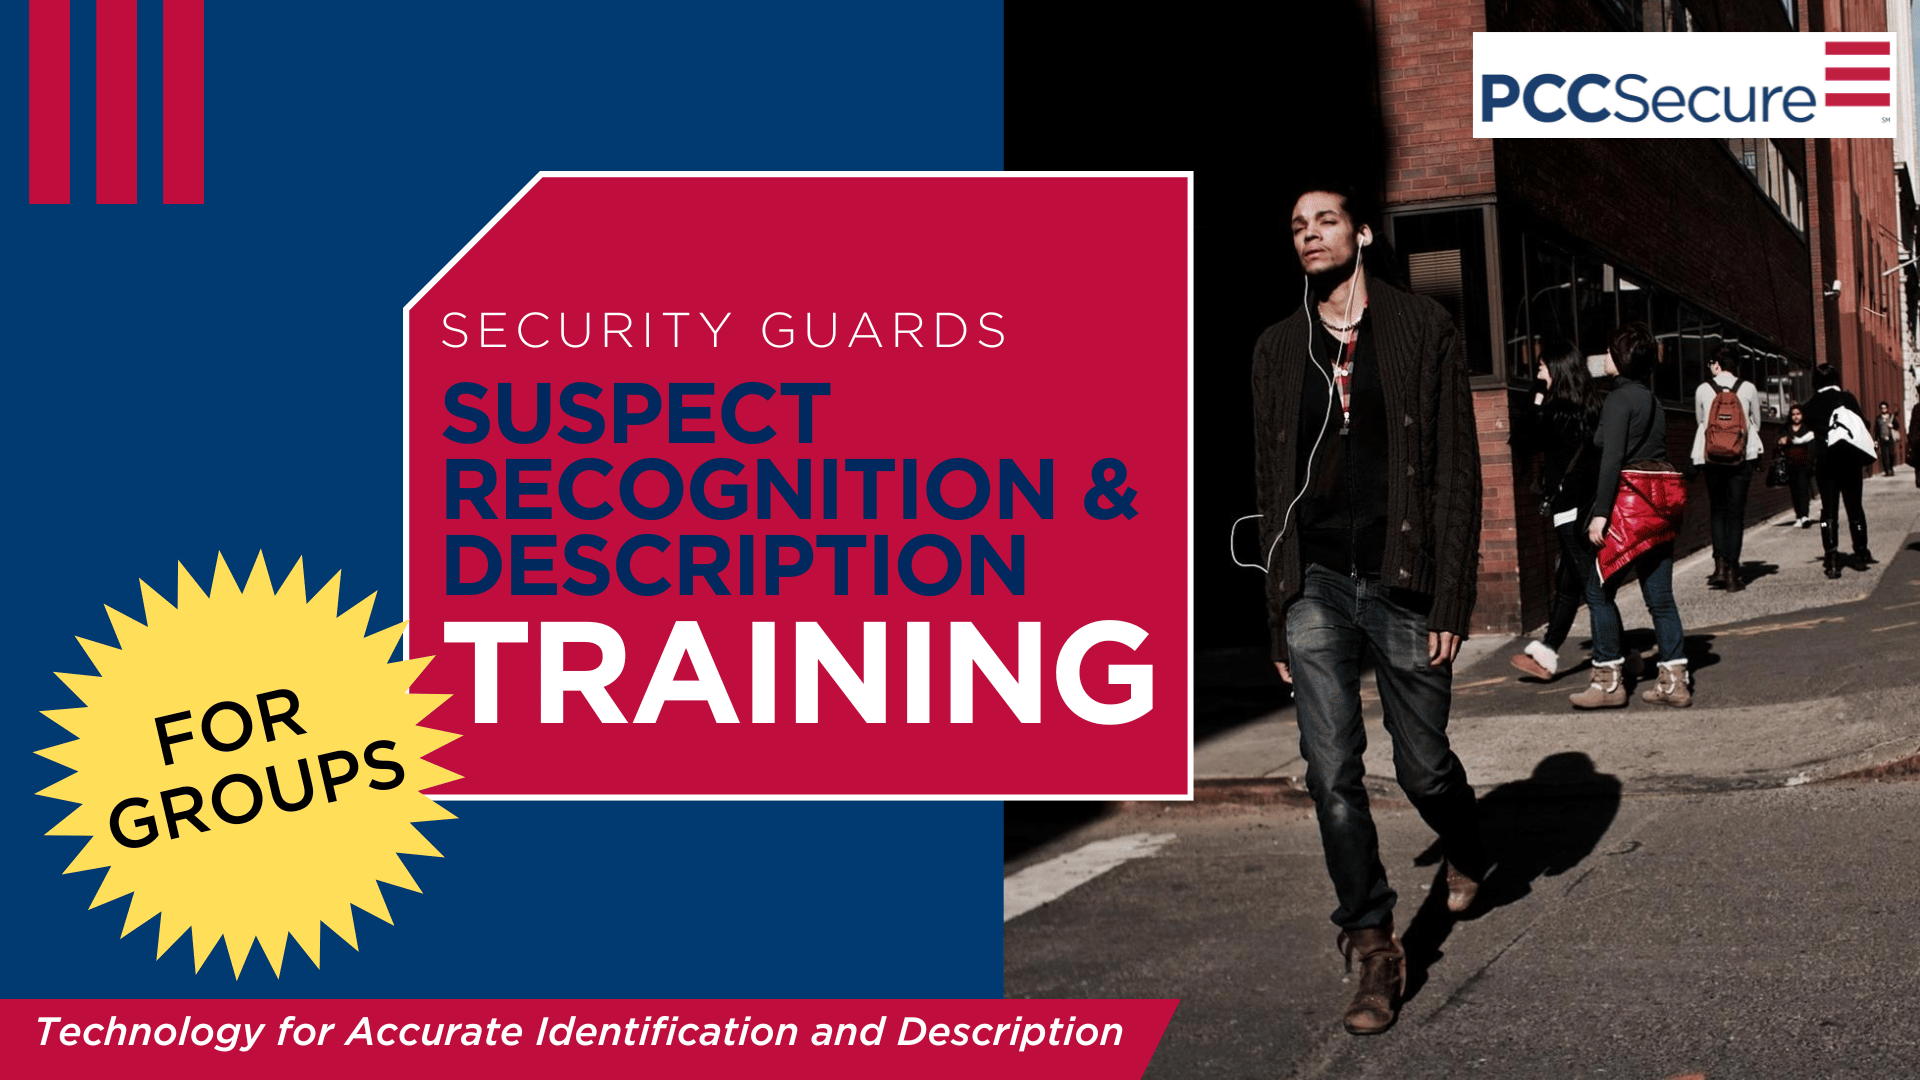 Suspect Recognition Online Training Course for Groups